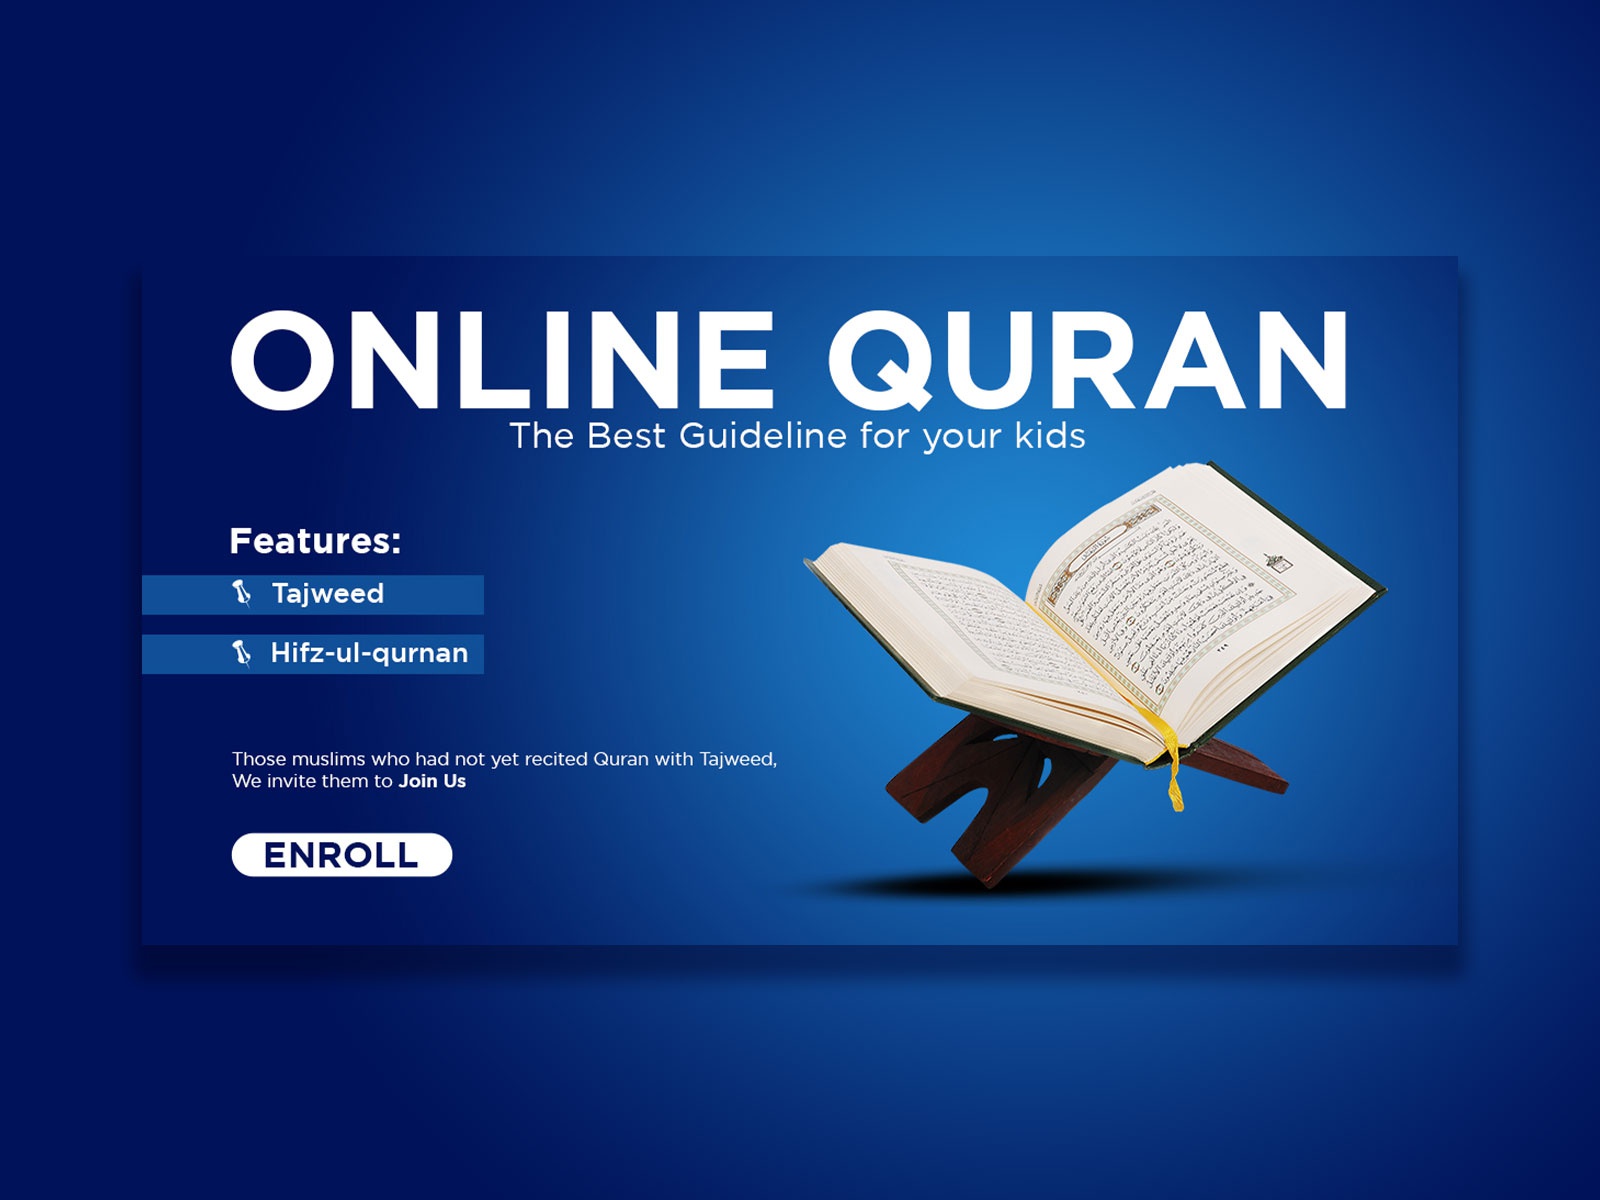 Quran Study in Canada via the Internet is now available